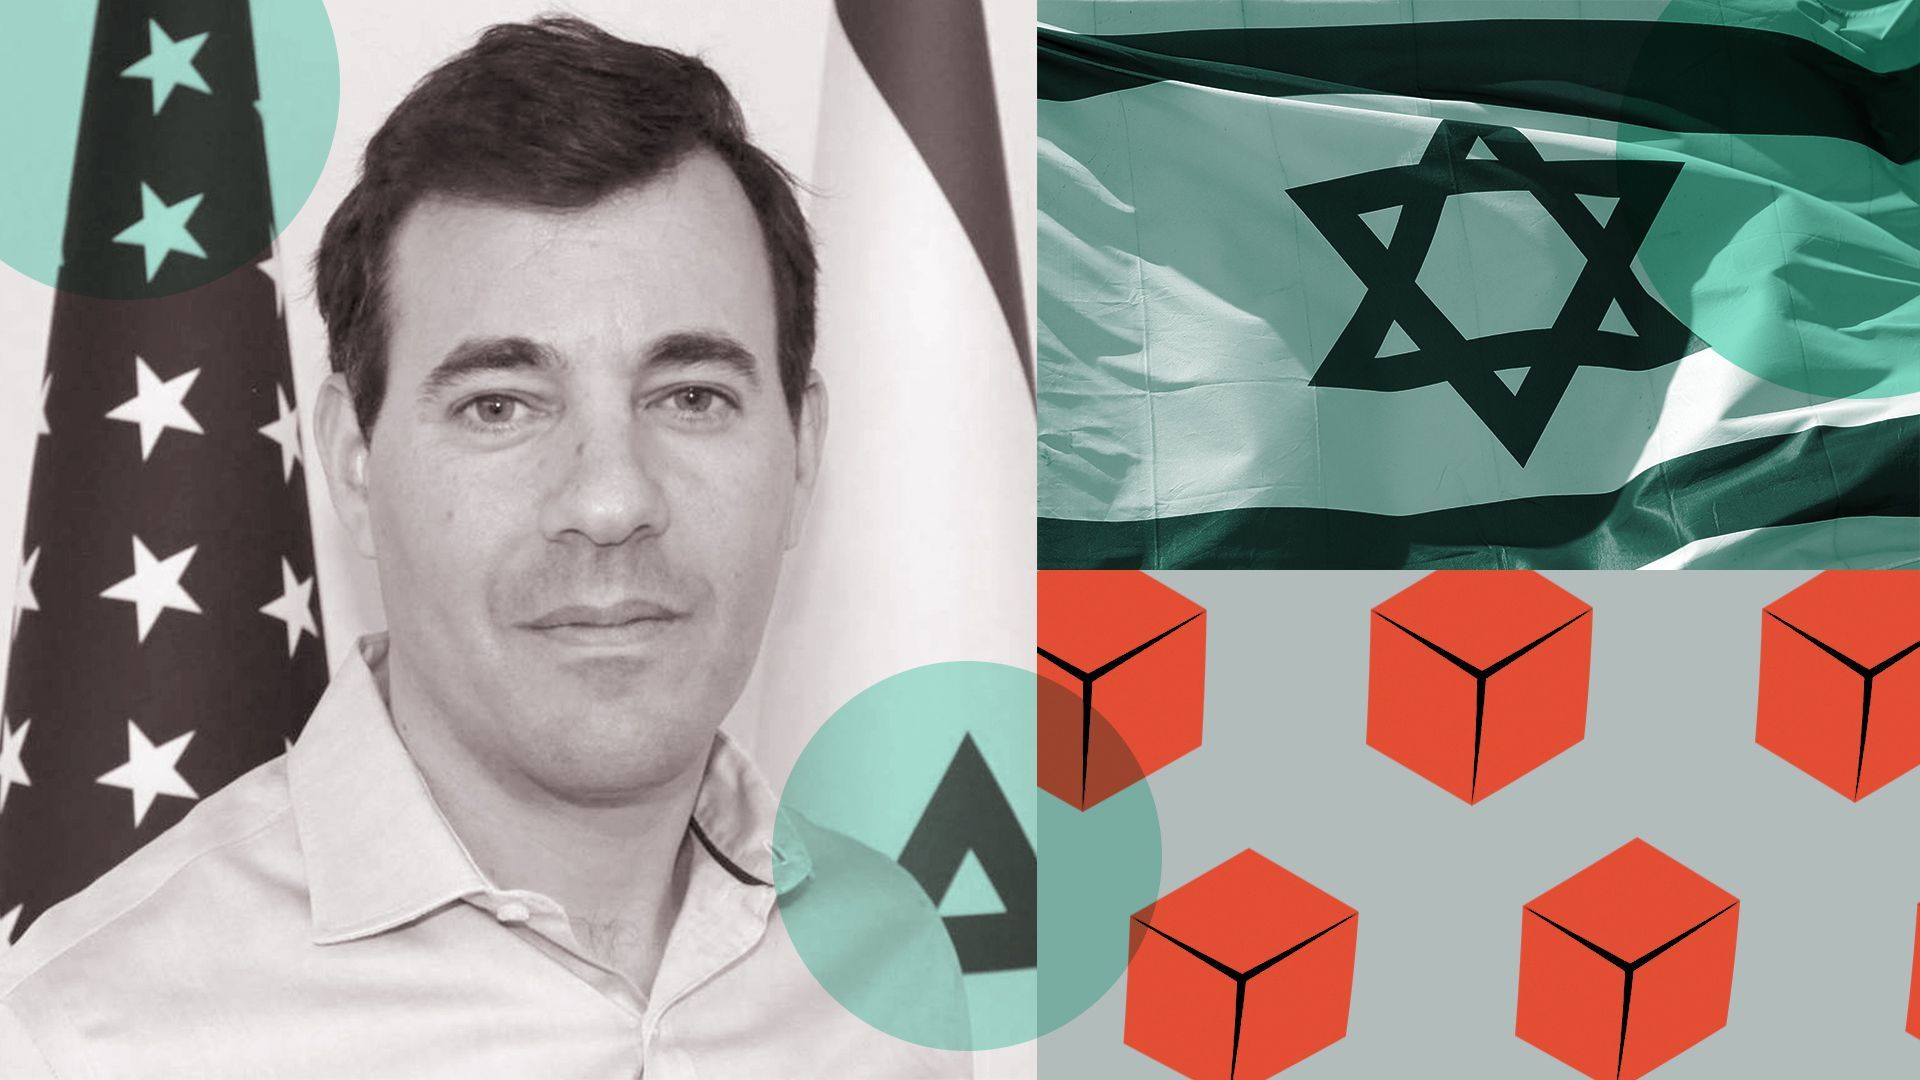 Photo illustration of Noach Hacker with the Israeli flag and blocks in the background.